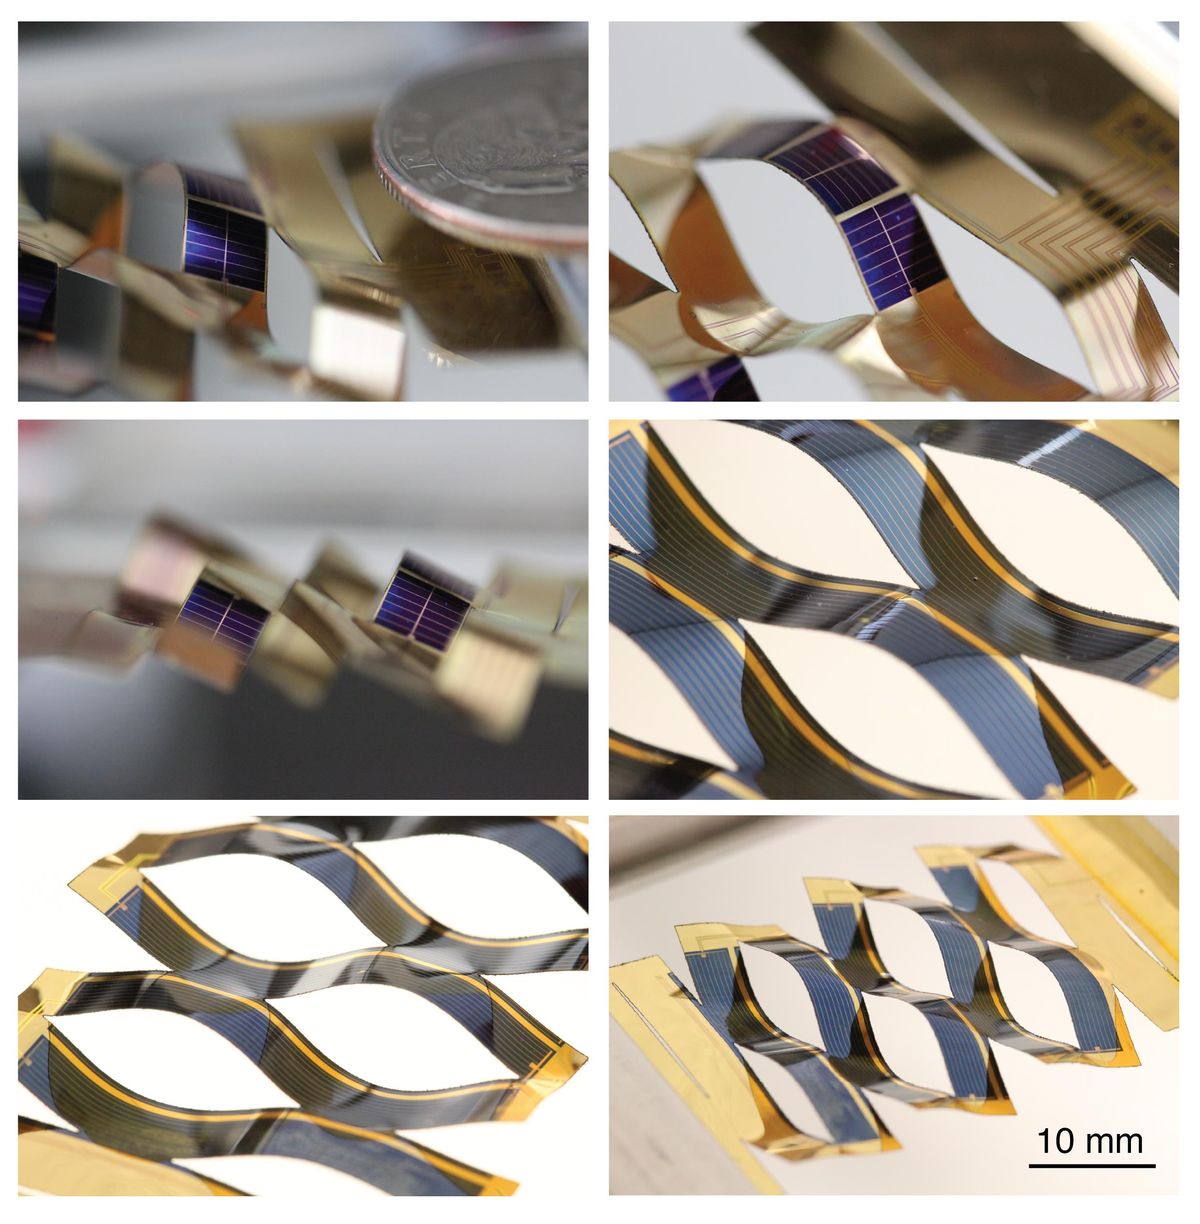 Japanese Paper Cutting Trick for Moving Solar Cells